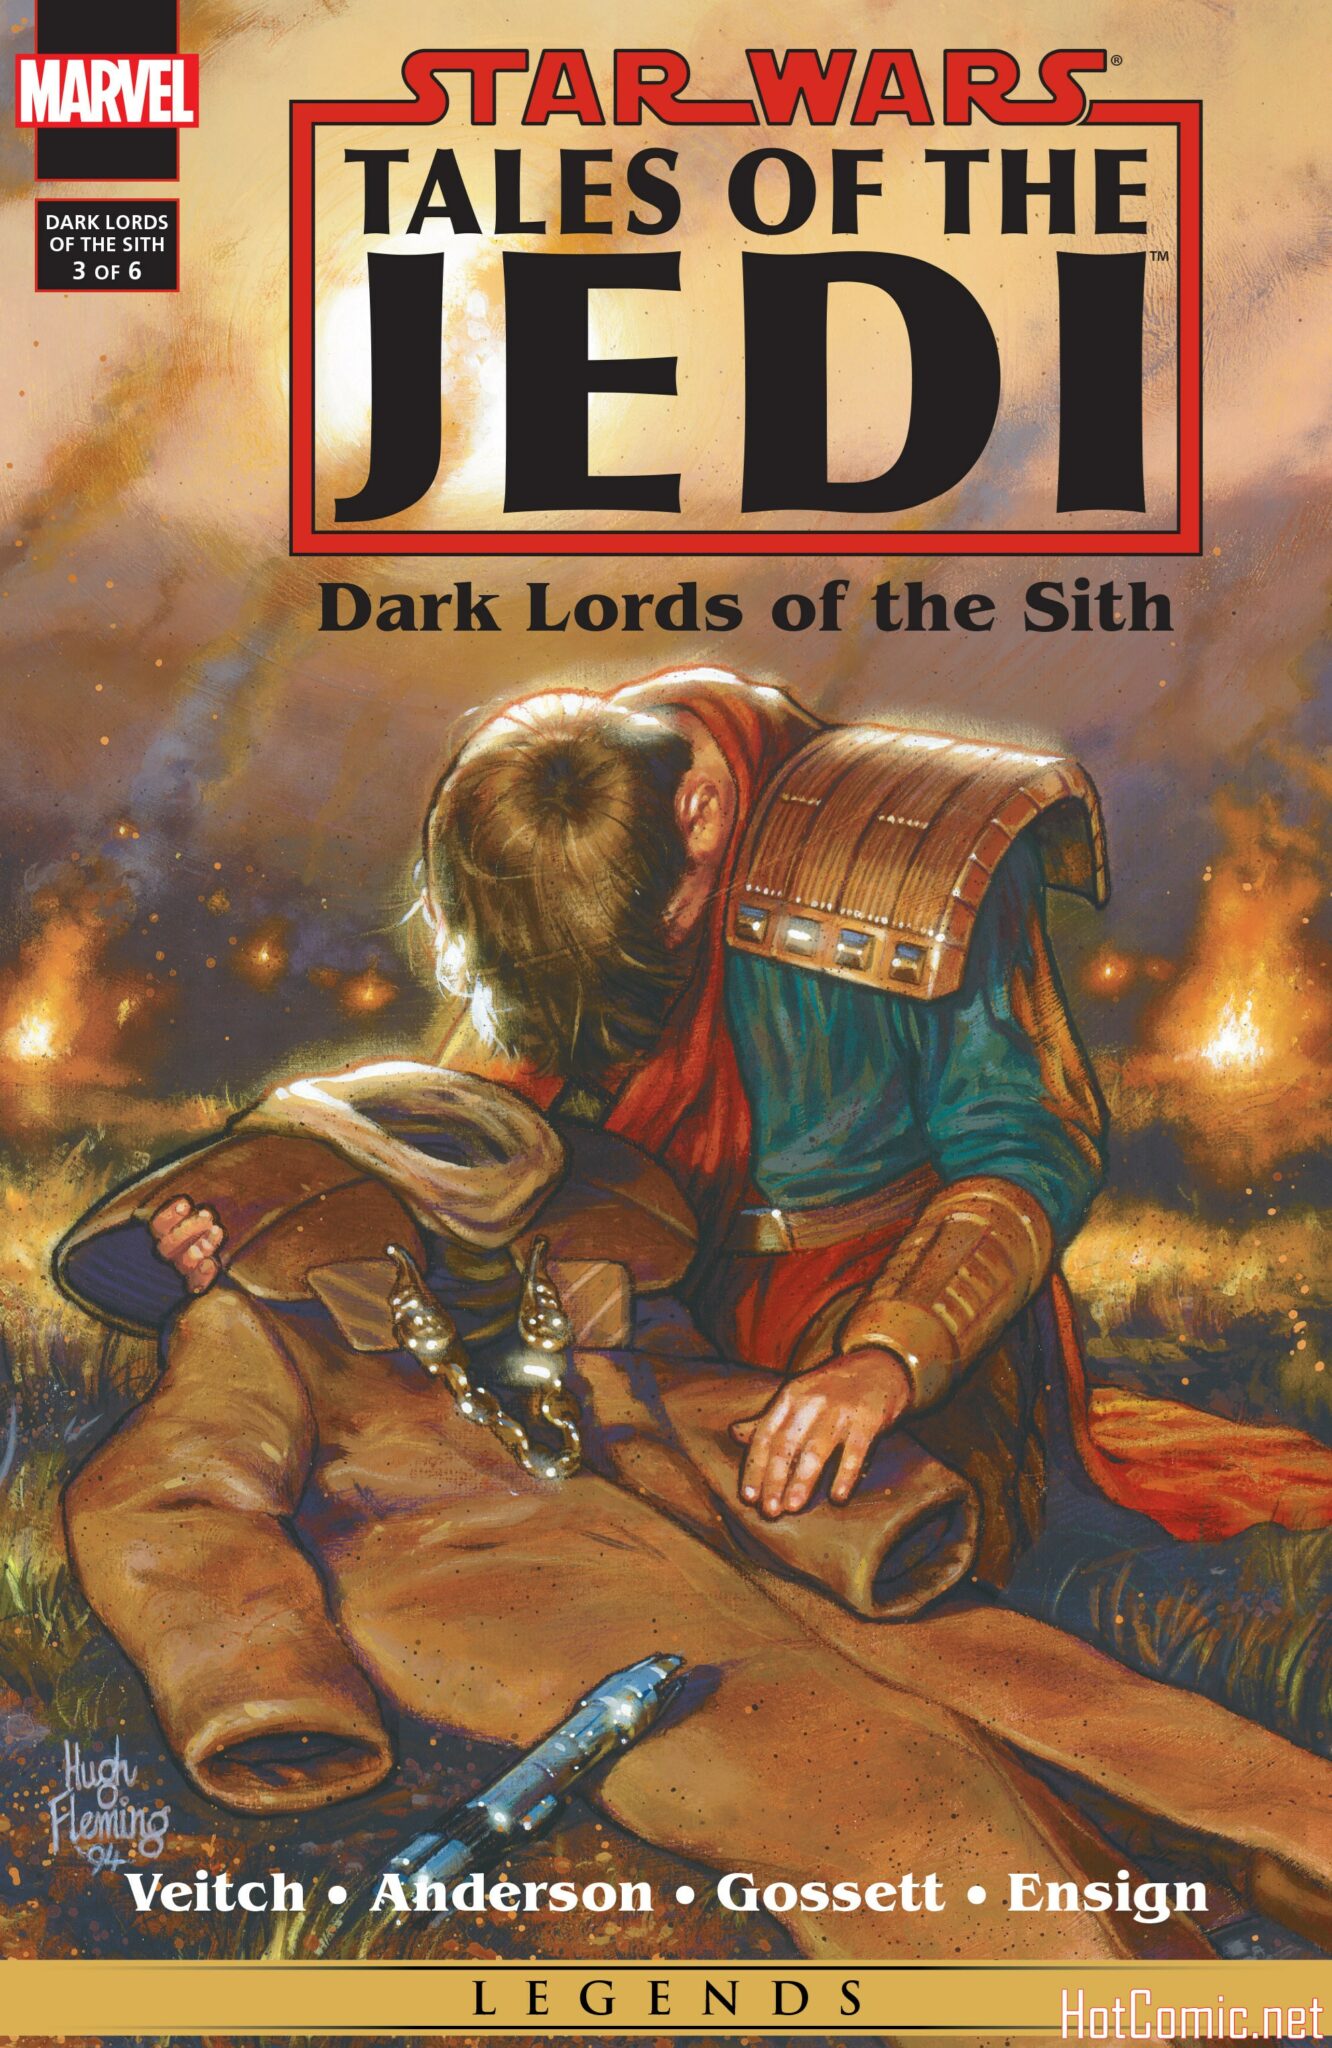 Star Wars: Tales of the Jedi - Dark Lords of the Sith